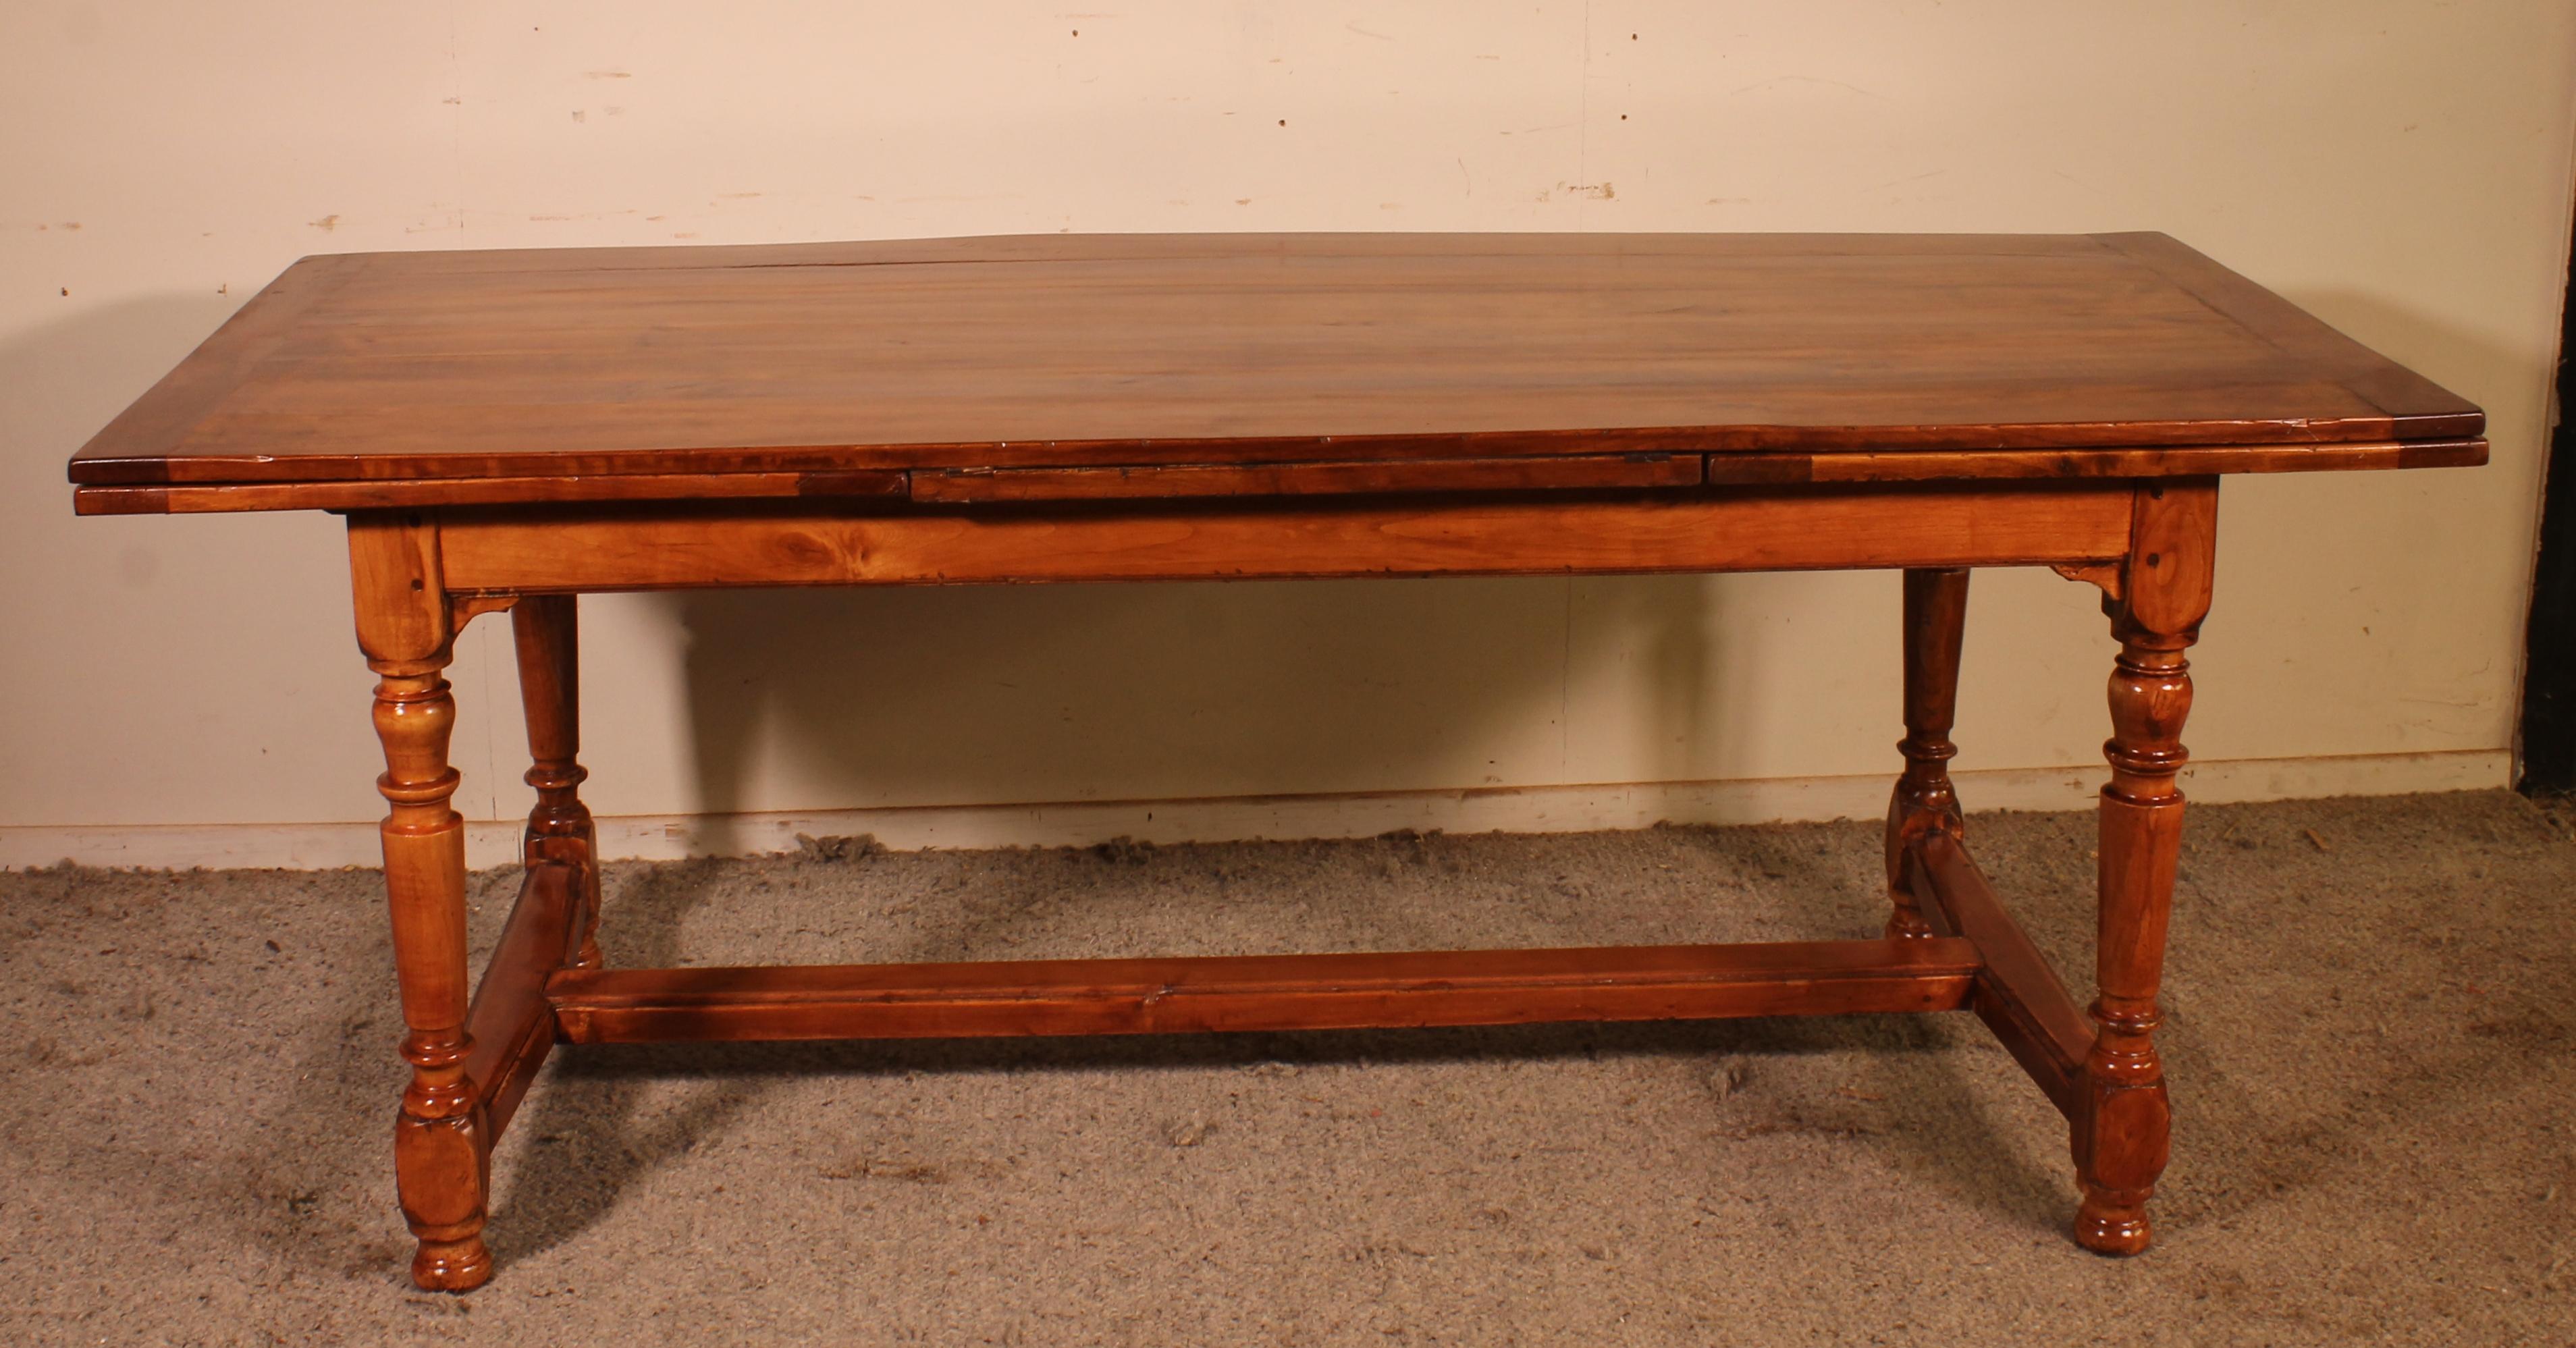 superb 19th century extending table in cherry wood -France.
Very elegant extending table with turned legs. Very nice turning connected by a spacer

The table which has two extensions of 66cm. The extensions are in cherry wood and the center in